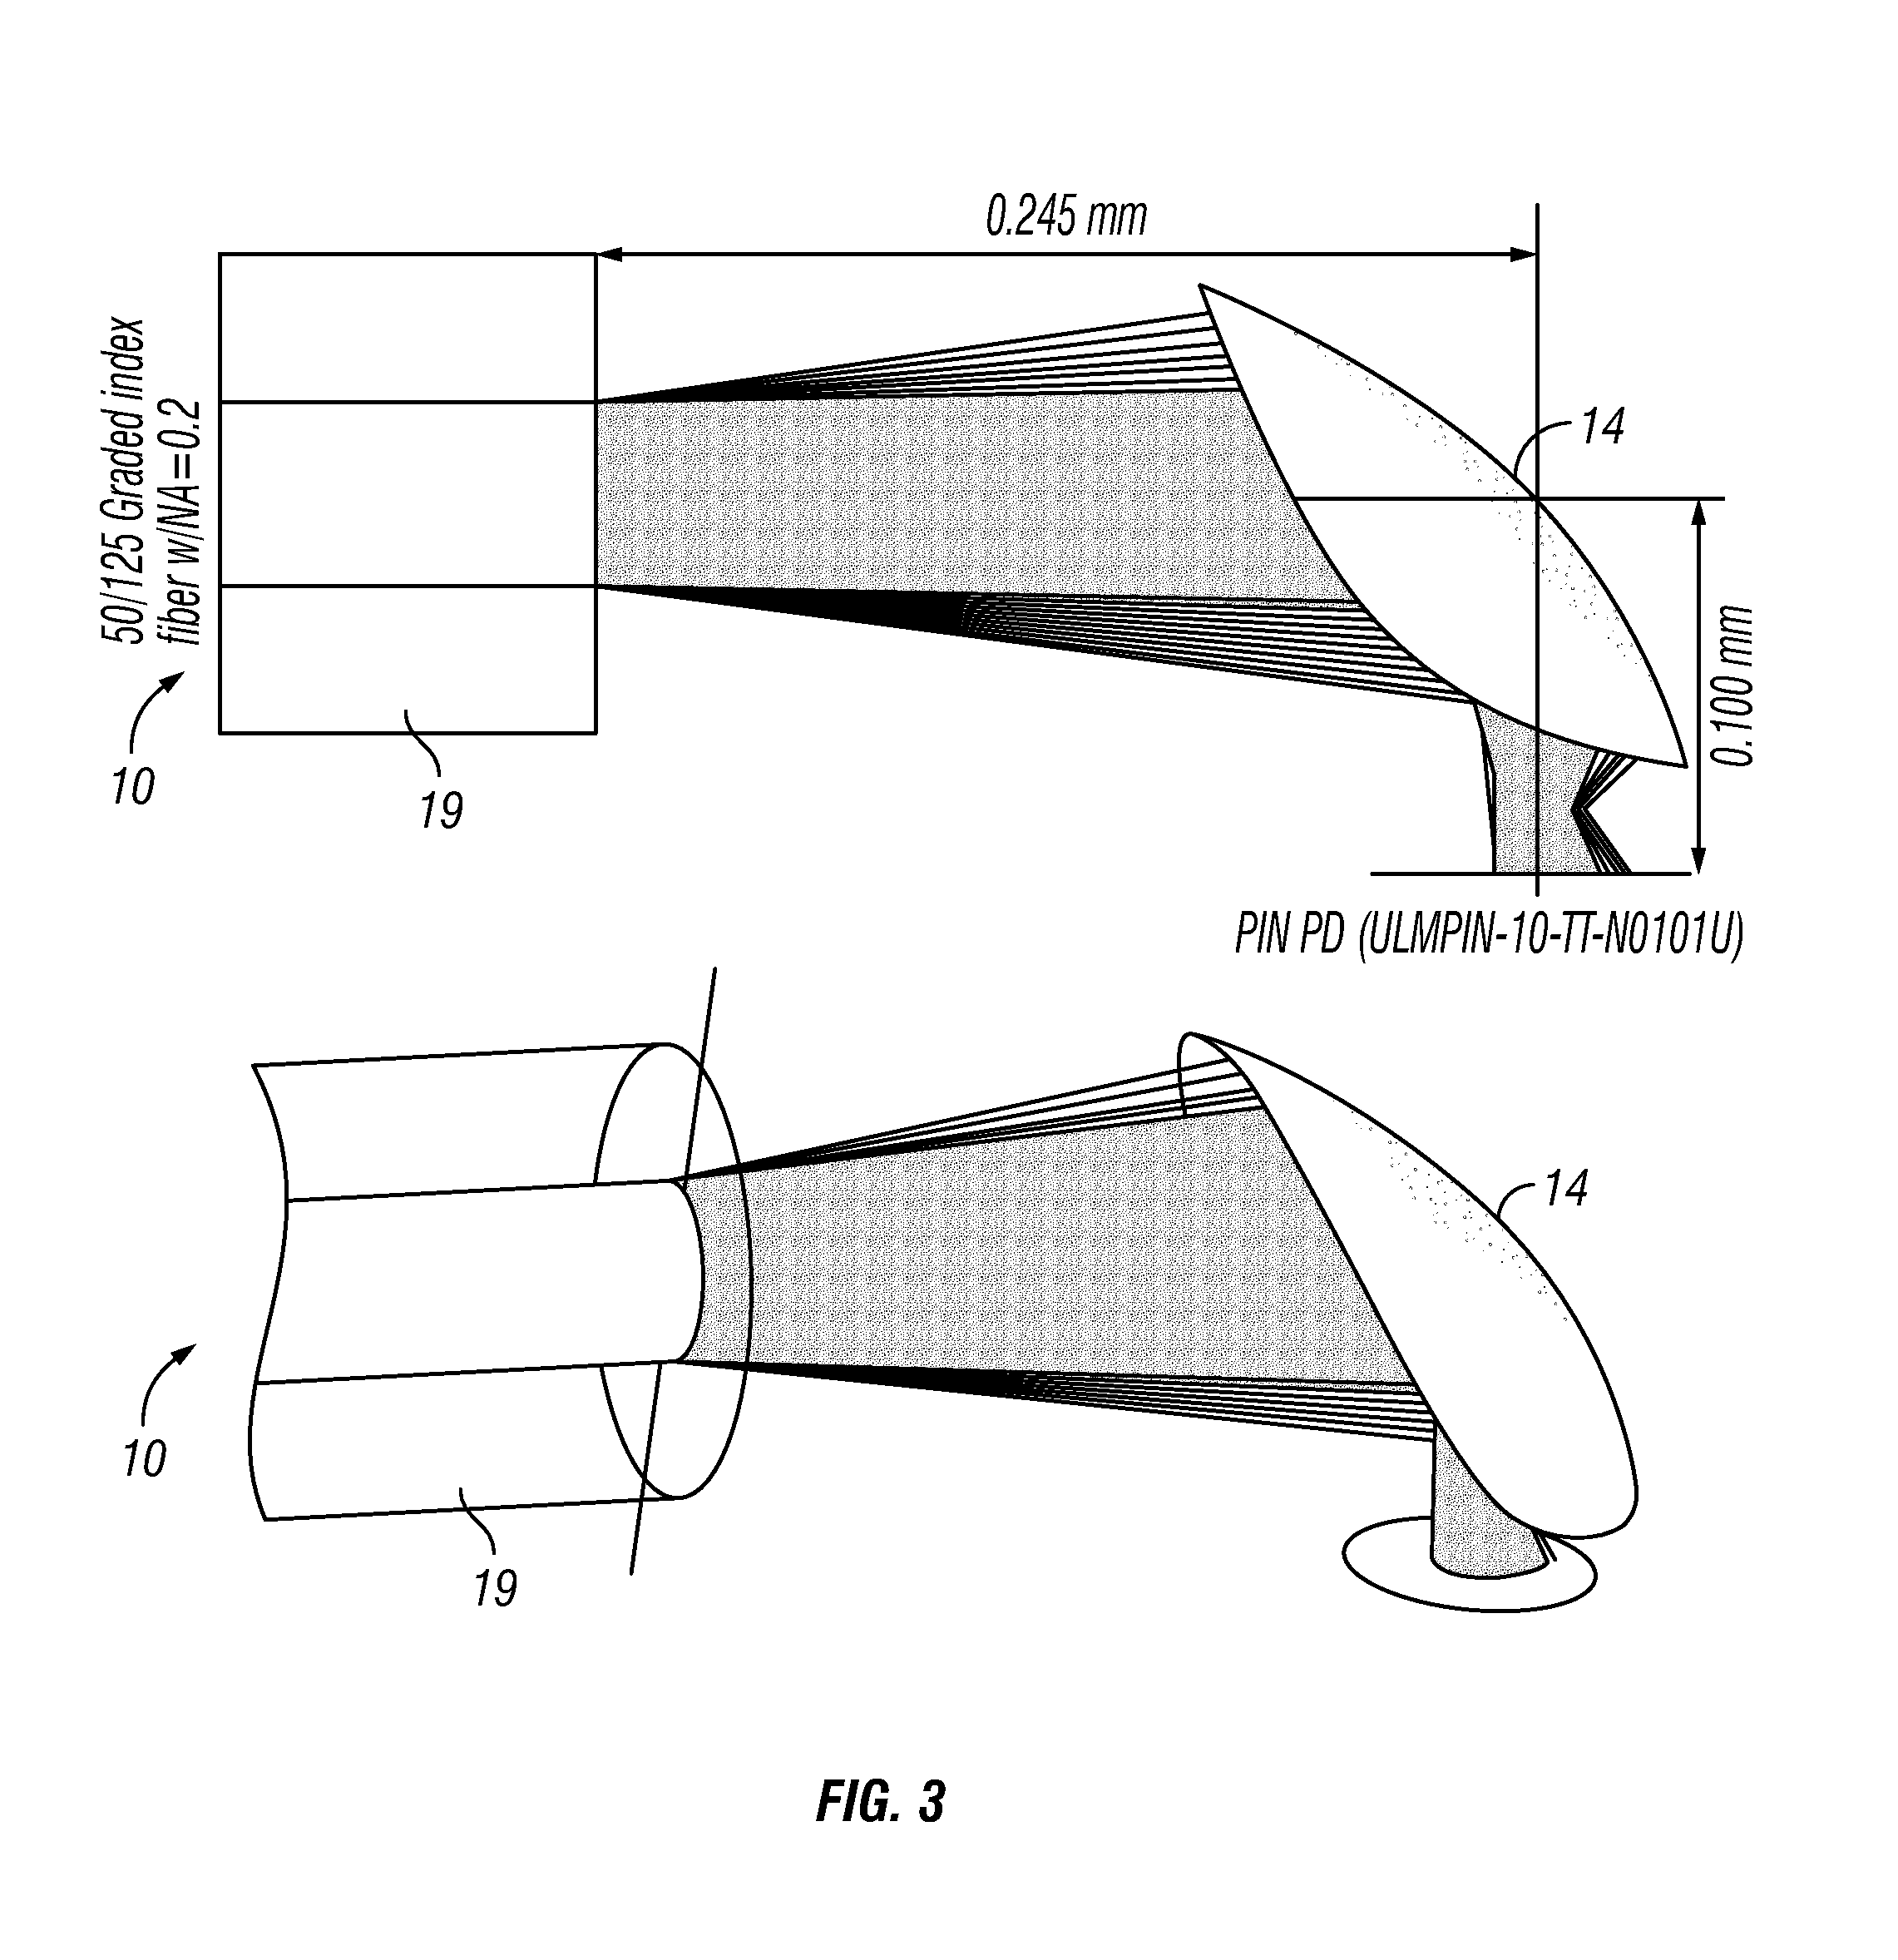 Coupling device having a structured reflective surface for coupling input/output of an optical fiber